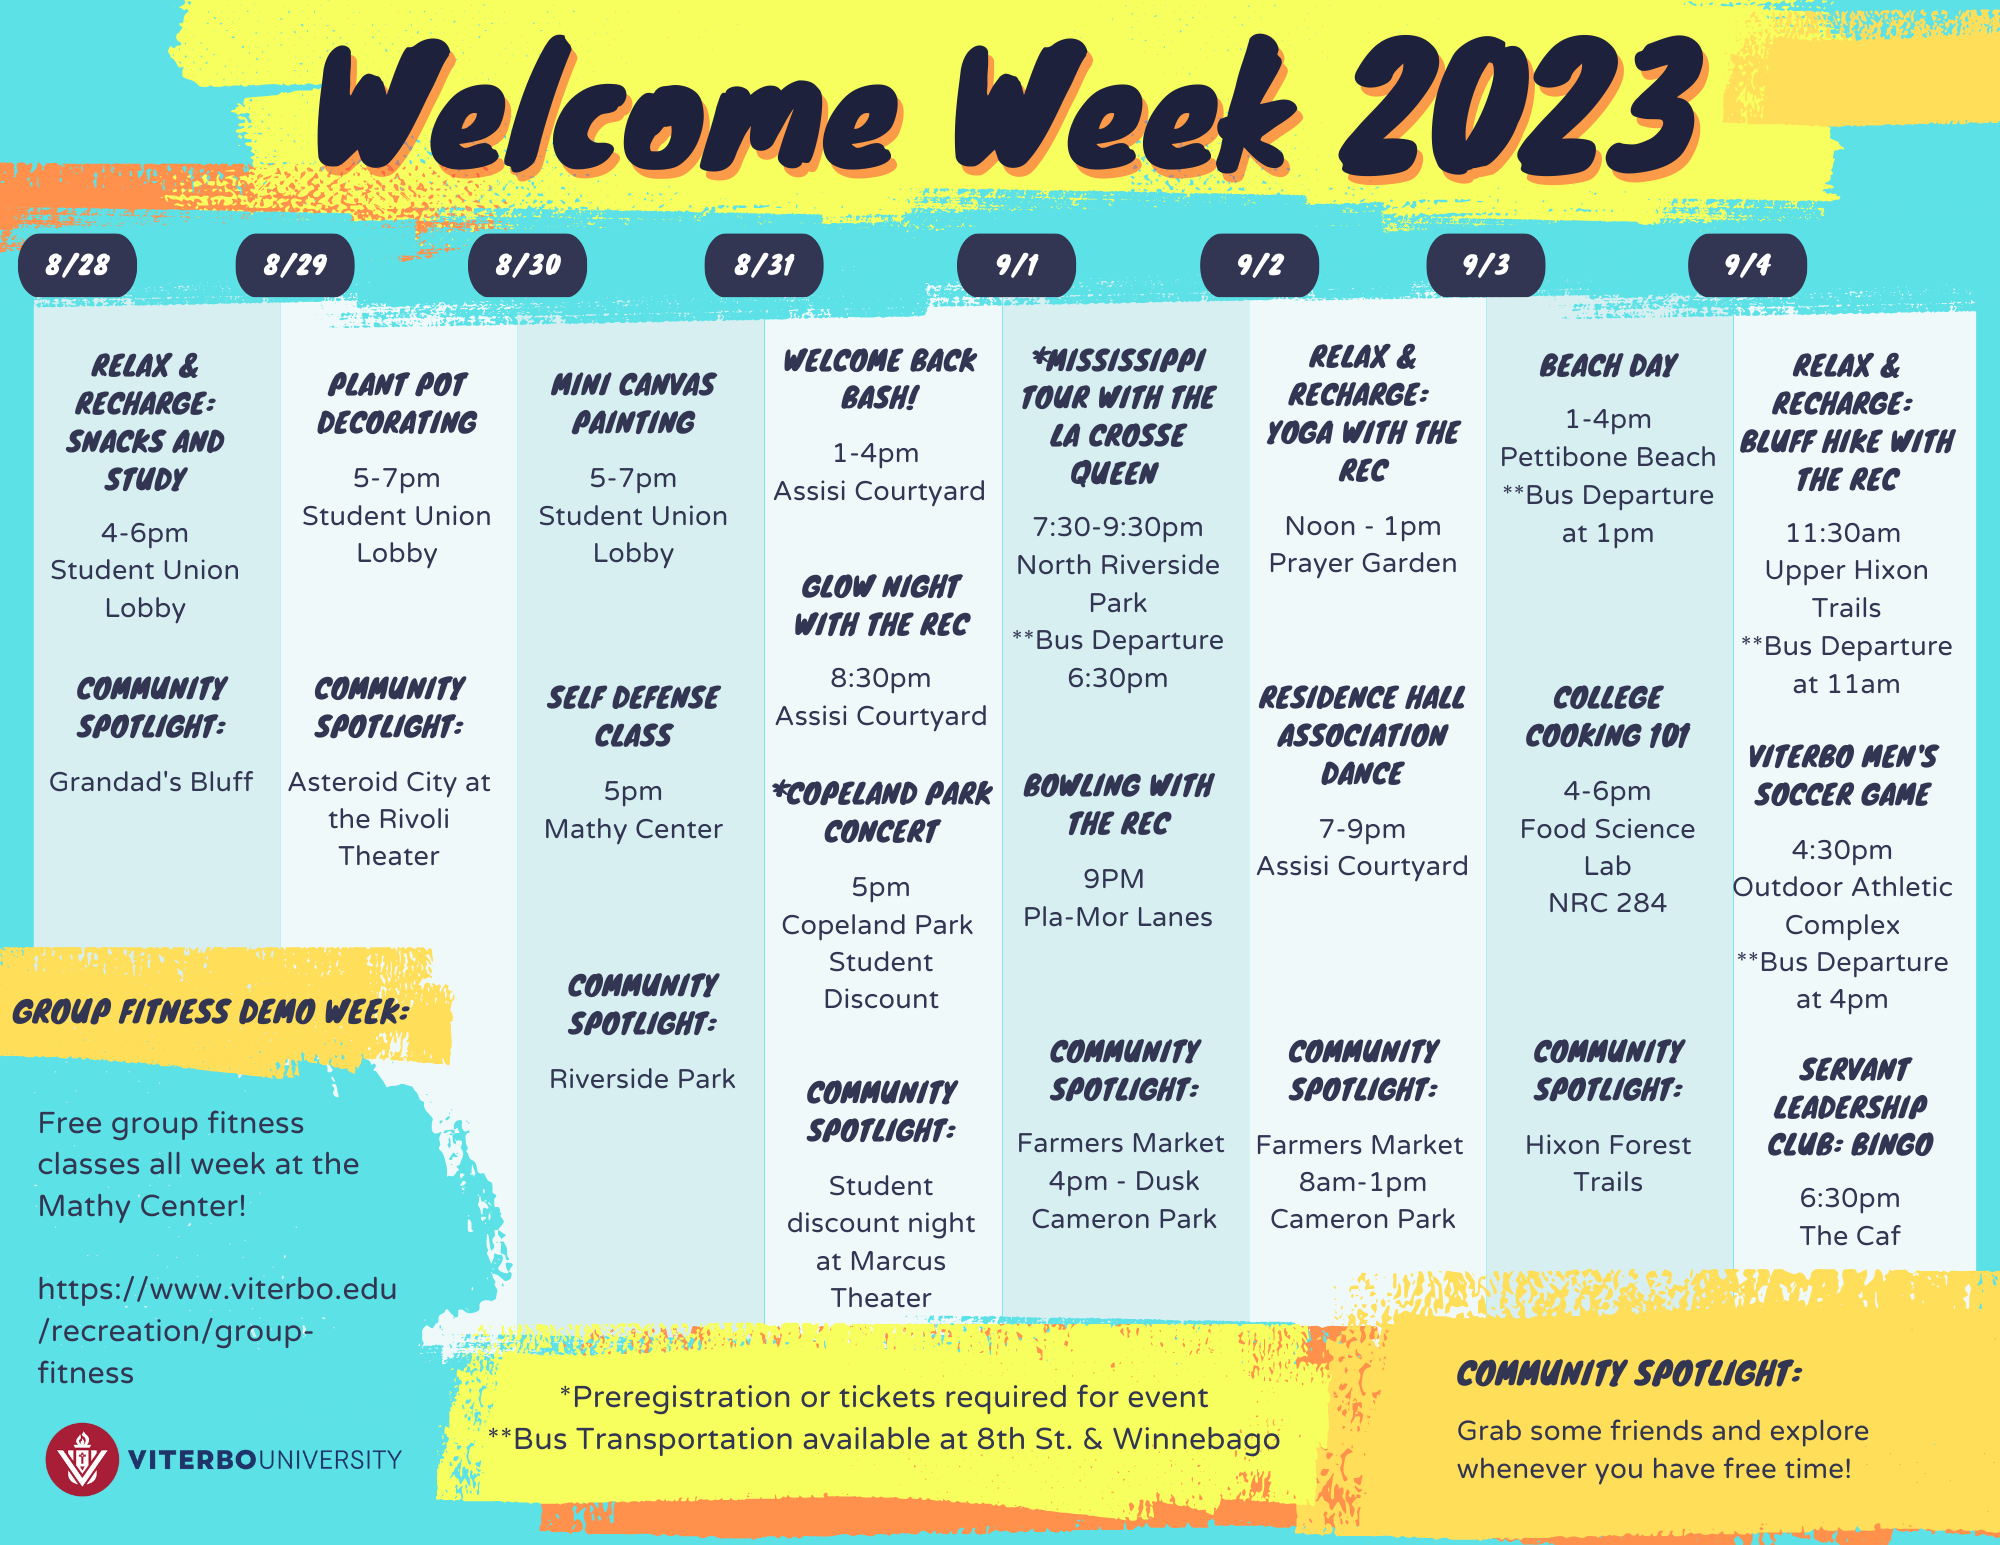 A flyer showcasing all of the events available for Viterbo University's 2023 Welcome Week